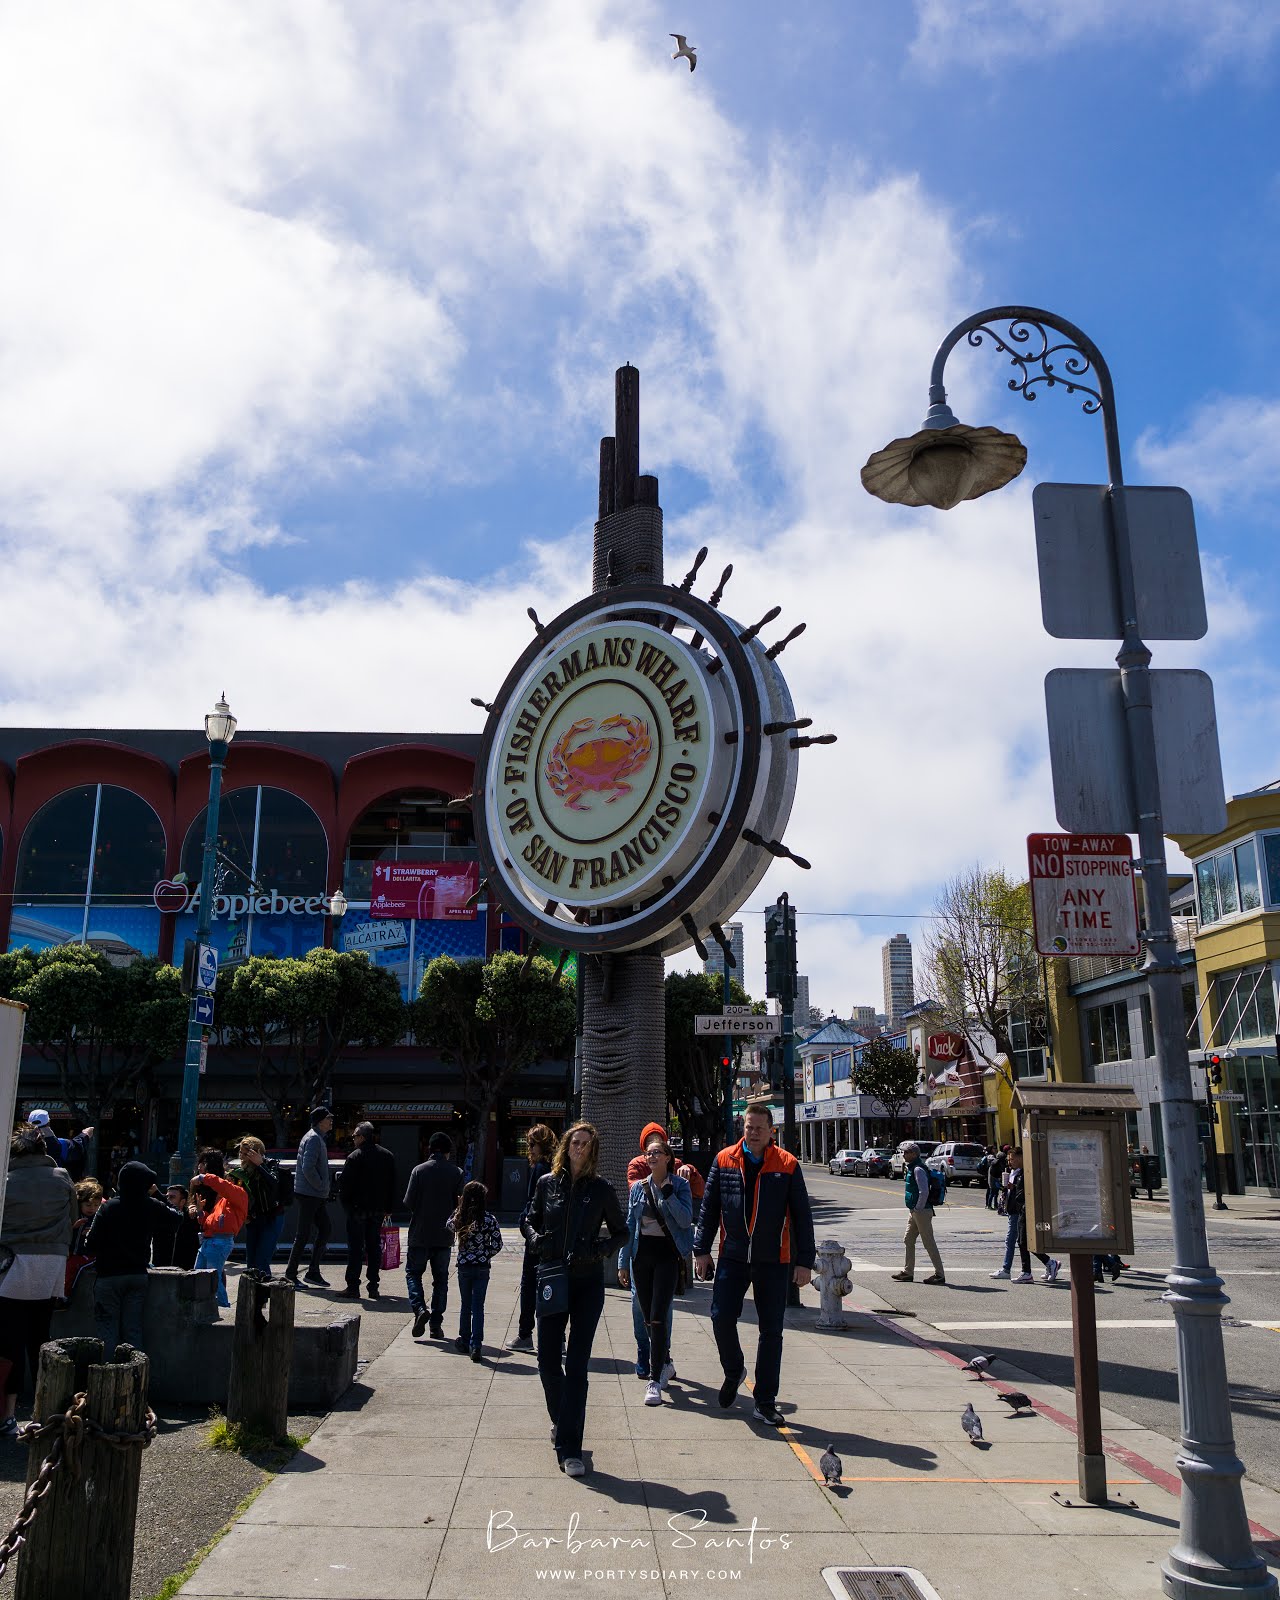 Travel - A week in San Francisco. Visiting Pier 39, Fisherman's Wharf and Lombard Street.